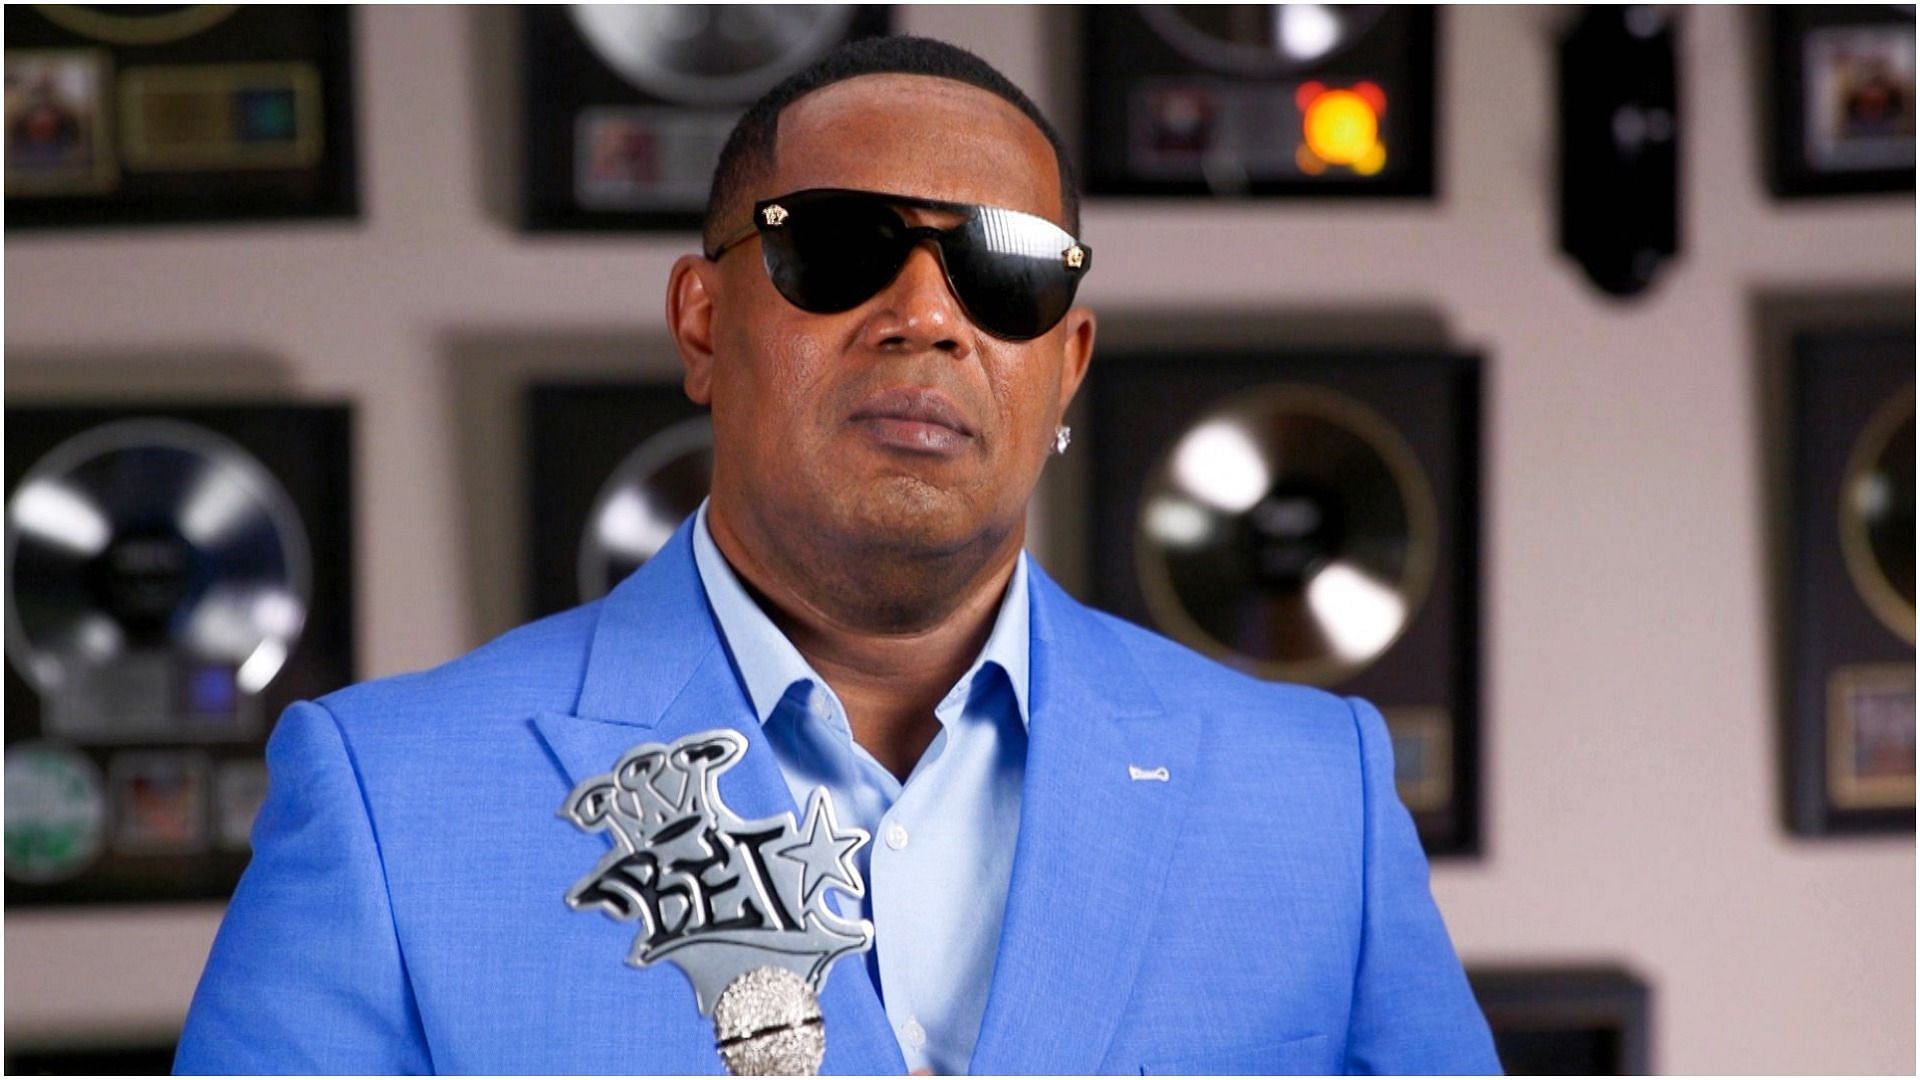 Master P has also managed to build his career as a successful entrepreneur (Image via 2020HHA/Getty Images)